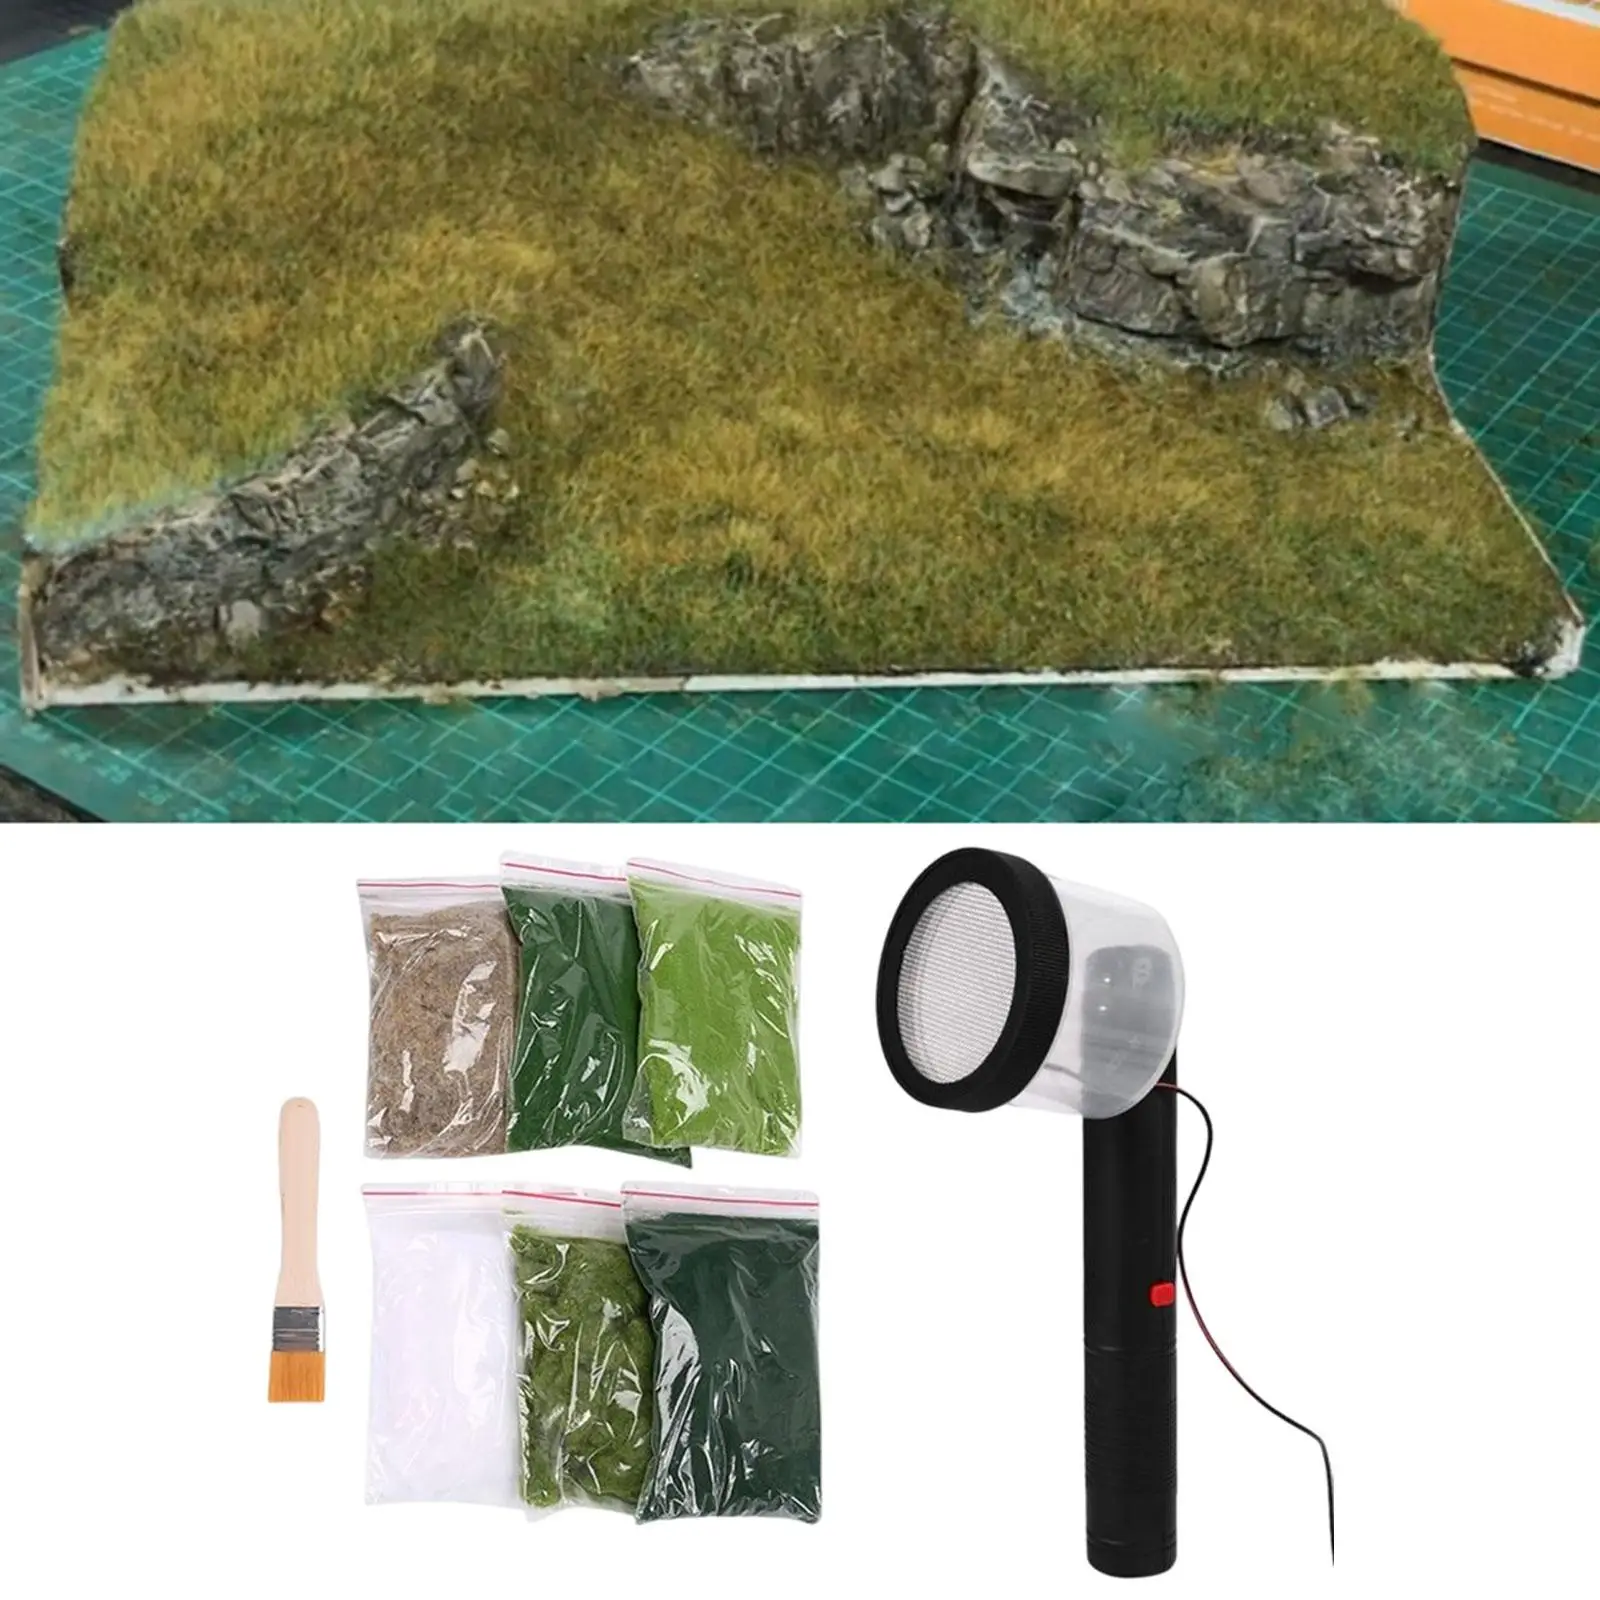 Static Grass Applicator Project Accessories DIY Miniature Scene Model Railway with 6 Bags Static Grass Sandtable Static Flocking